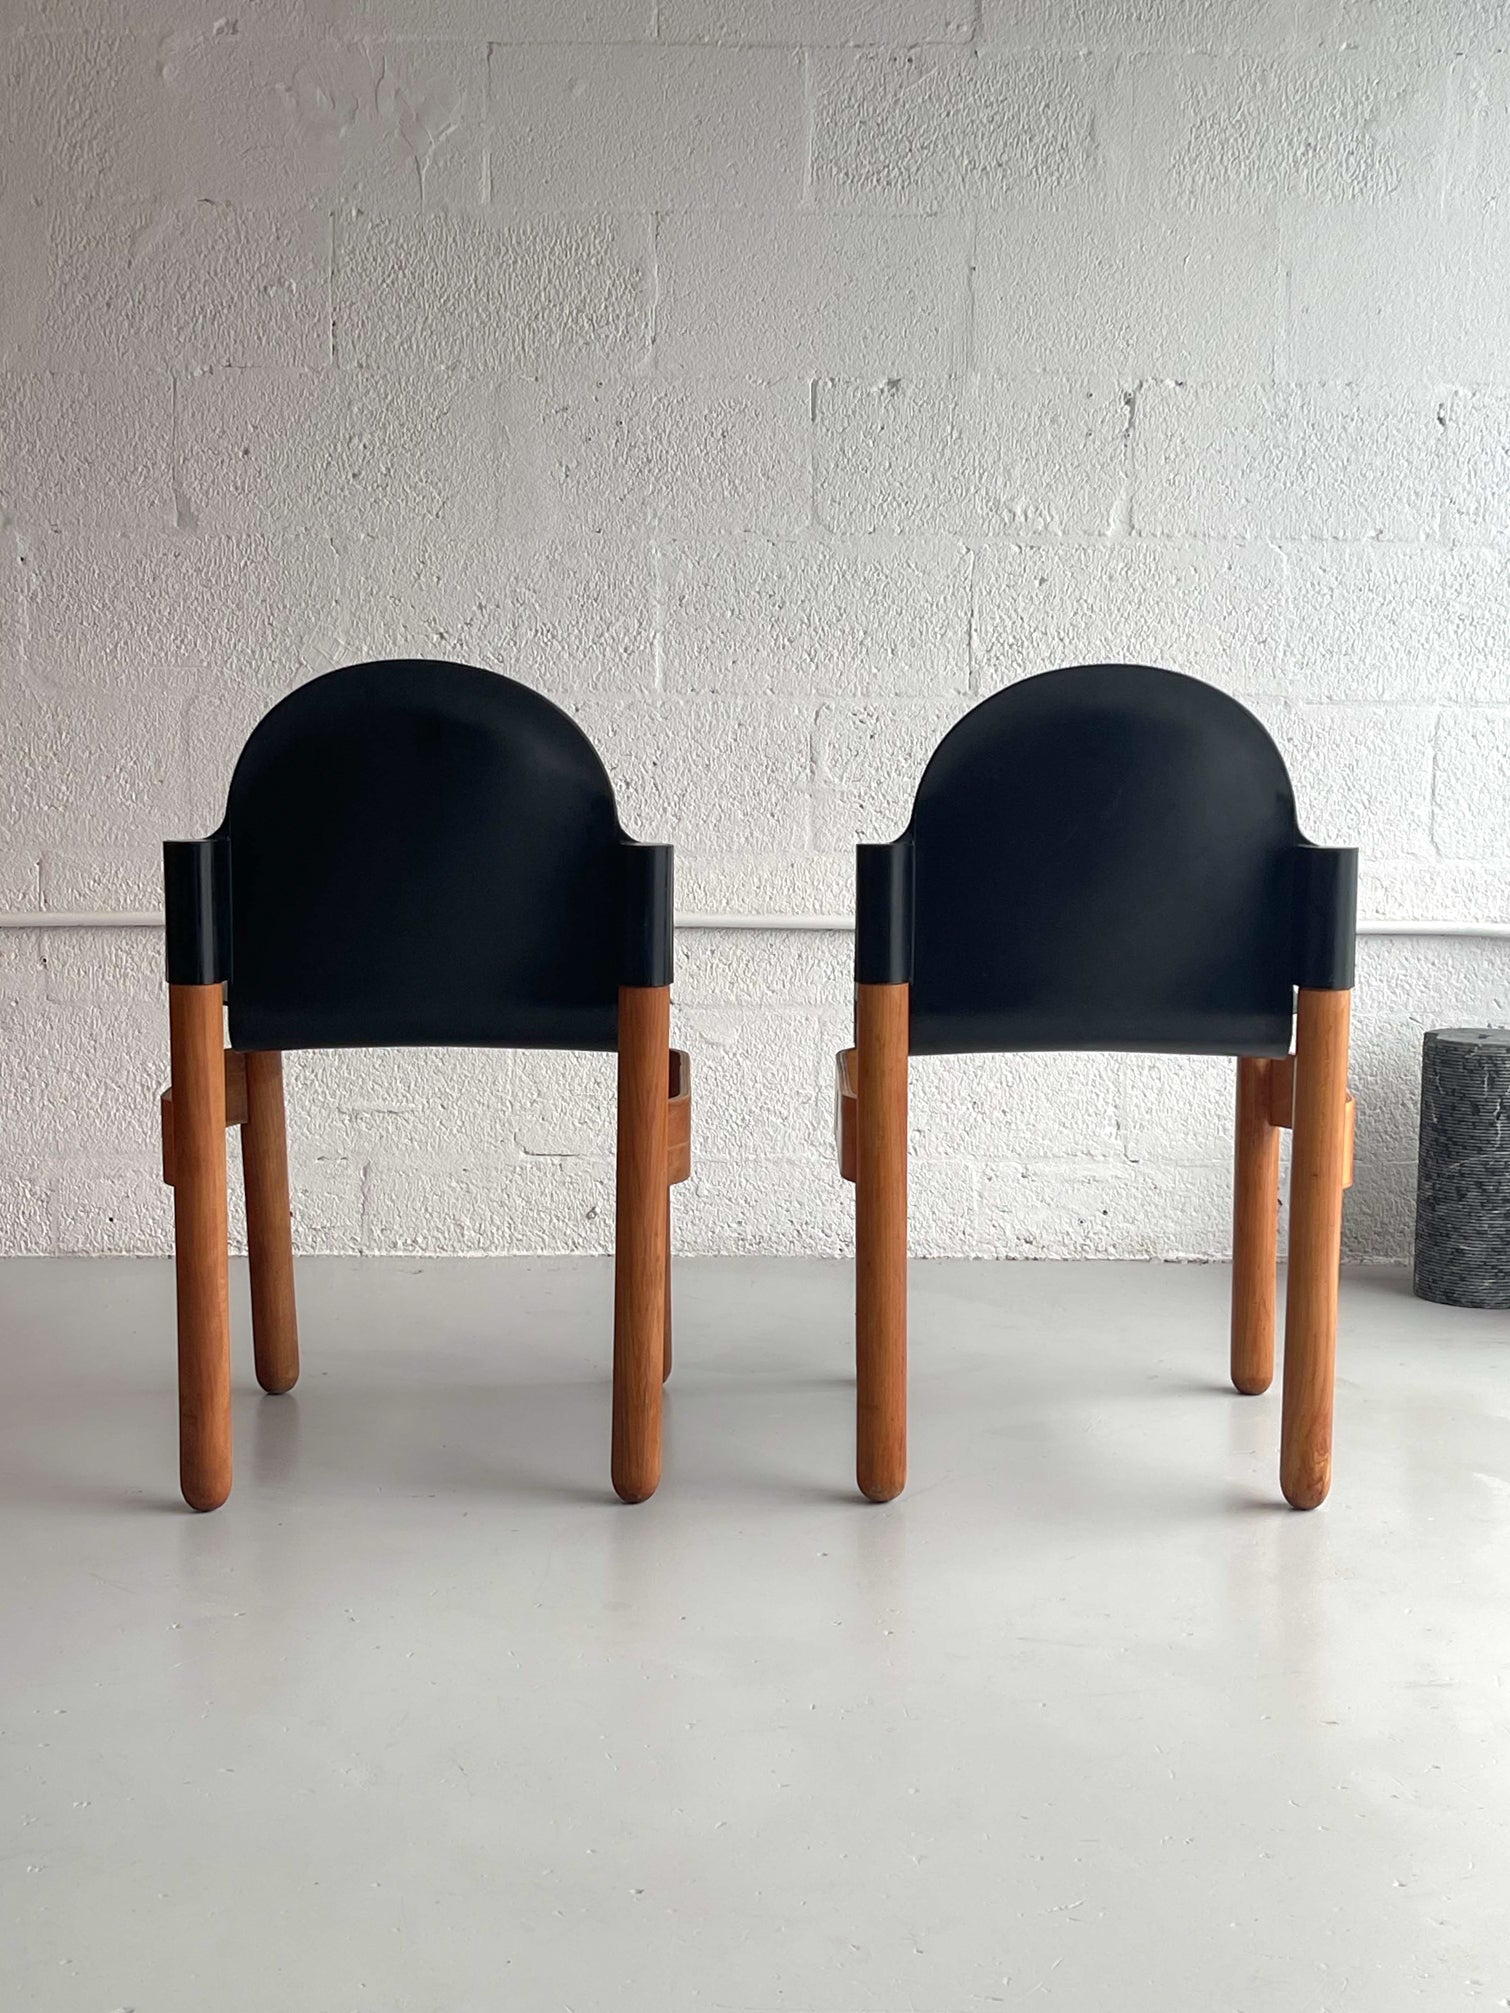 1970s "Flex 2000" Chairs by Gerd Lange for Thonet - A Pair